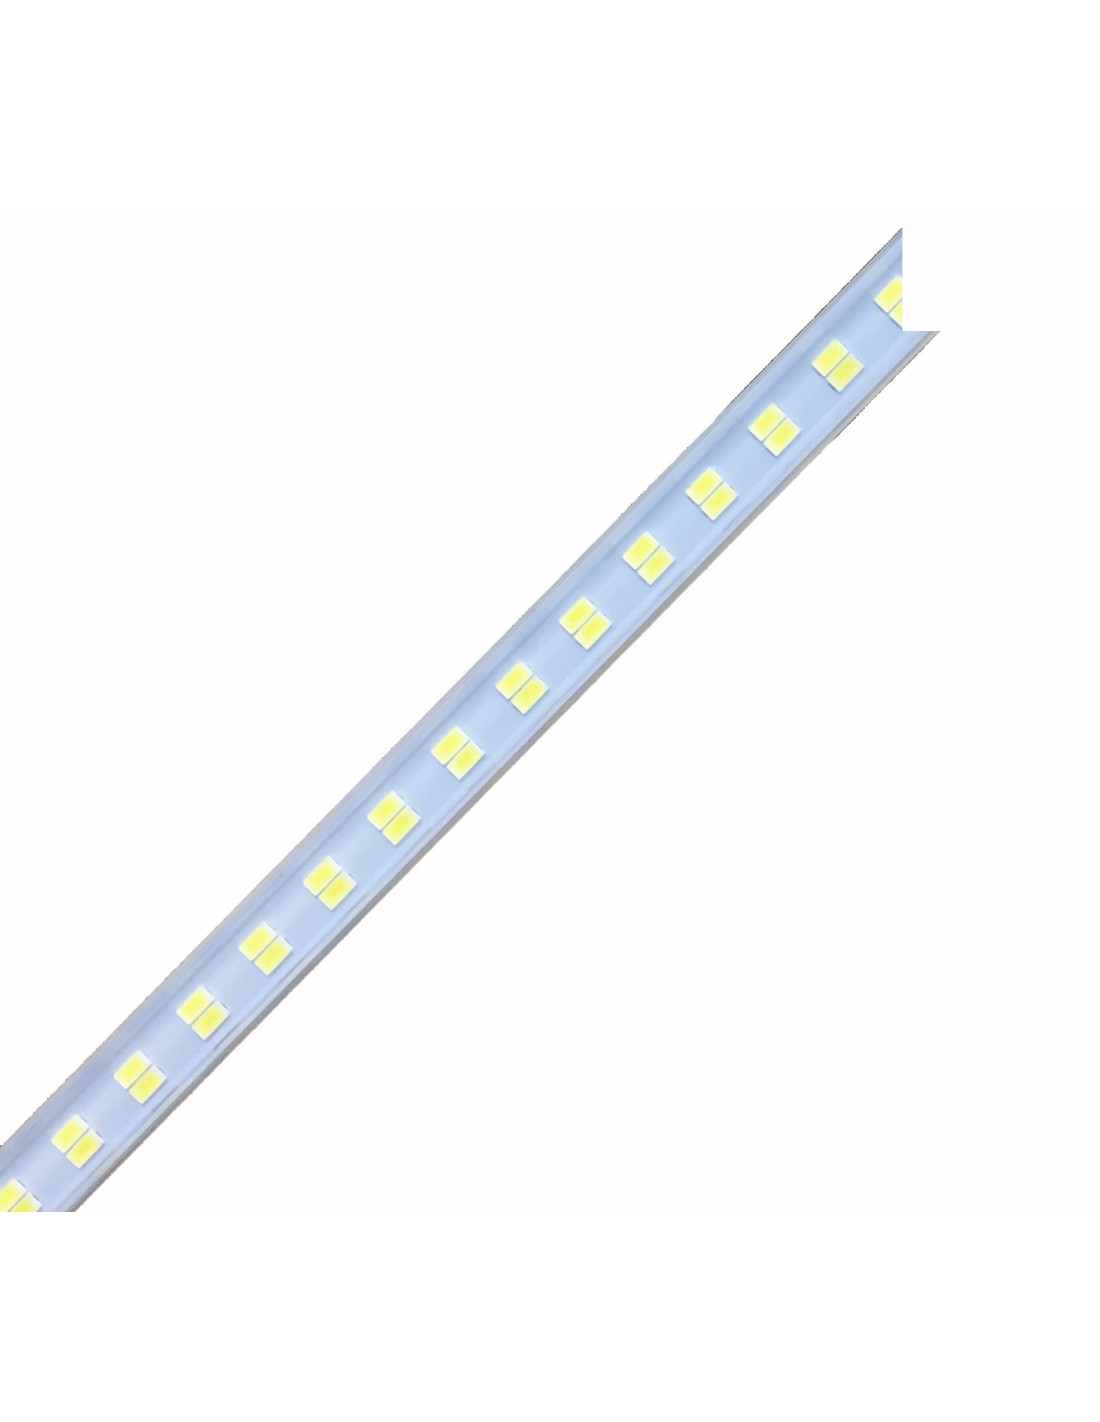 Led lighting -For mod. FESTIVAL-8 - available only with plexiglass service plan